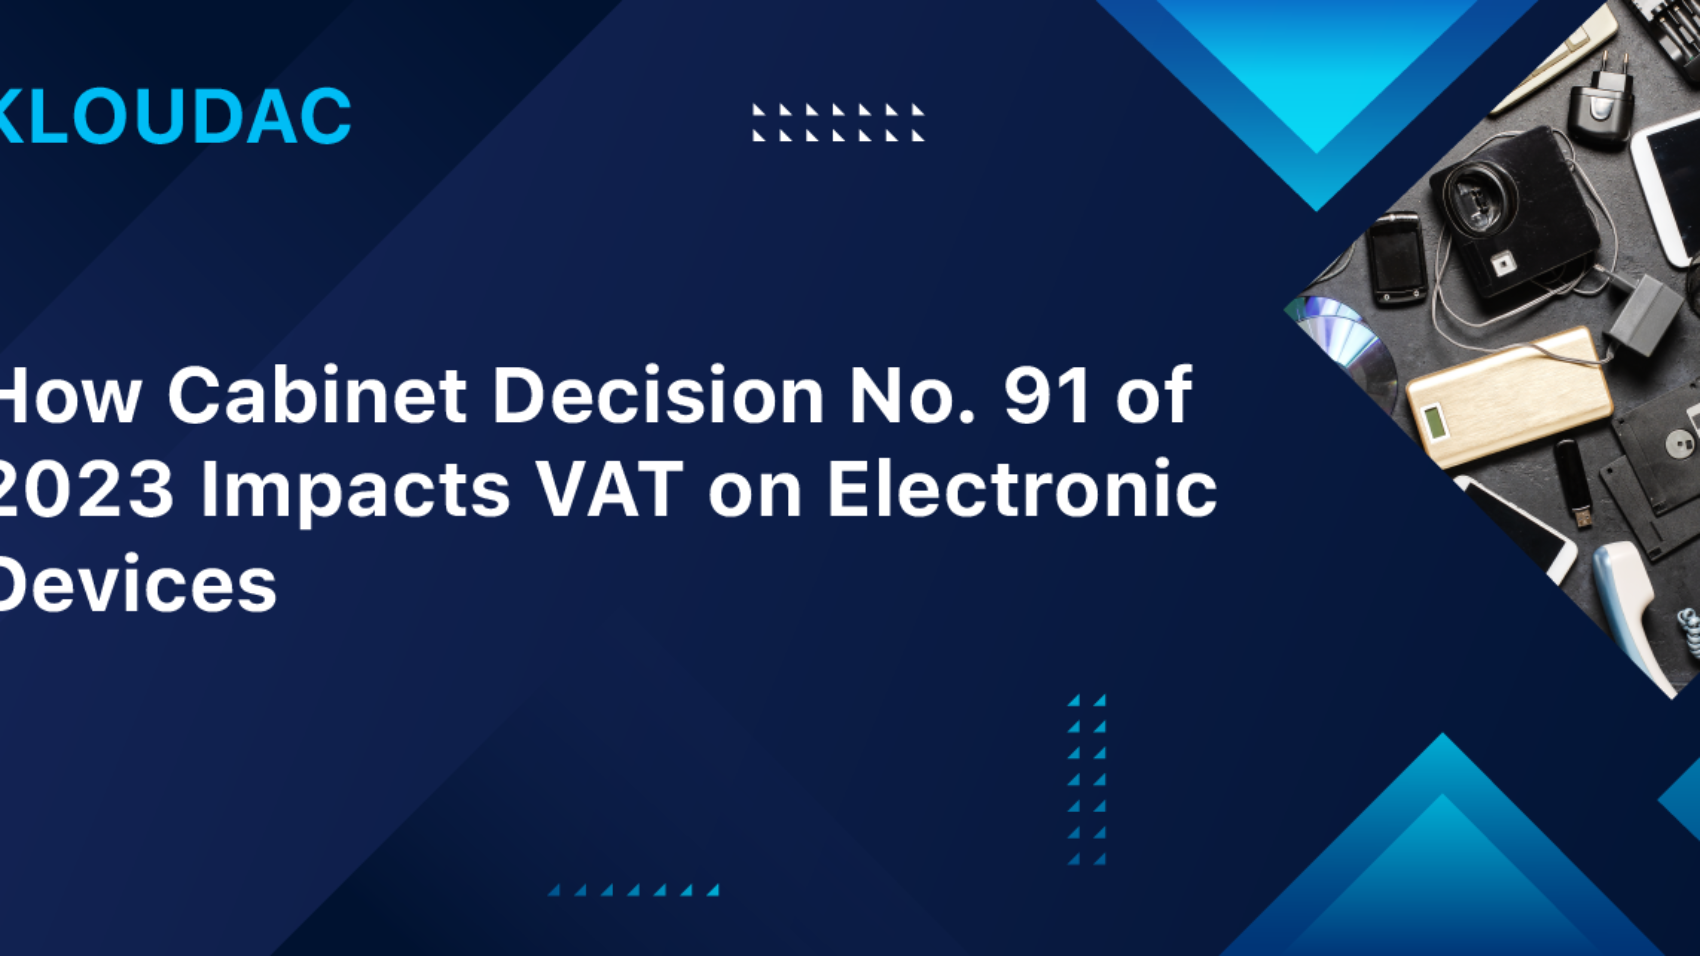 How Cabinet Decision No. 91 of 2023 Impacts VAT on Electronic Devices